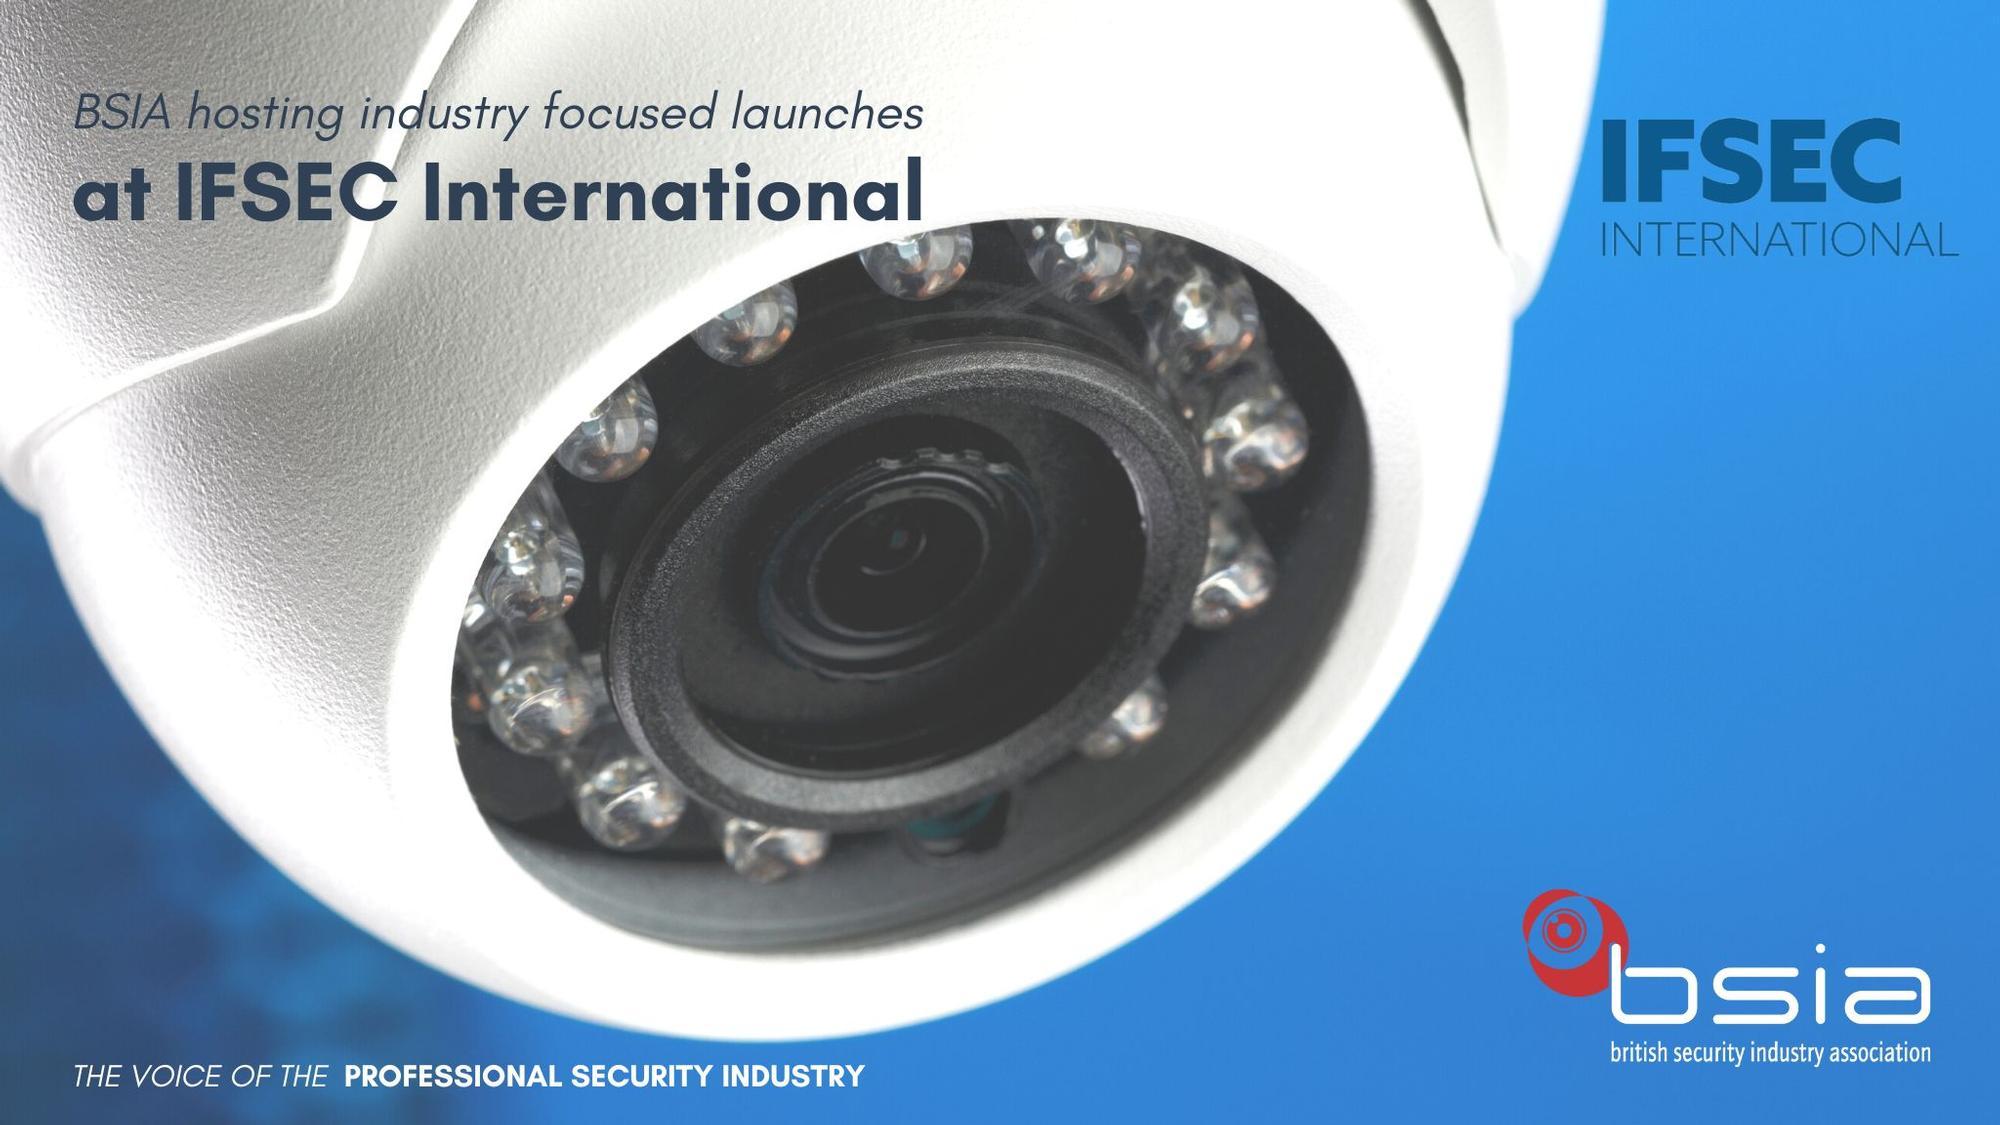 BSIA to host industry focused launches on its stand at IFSEC International